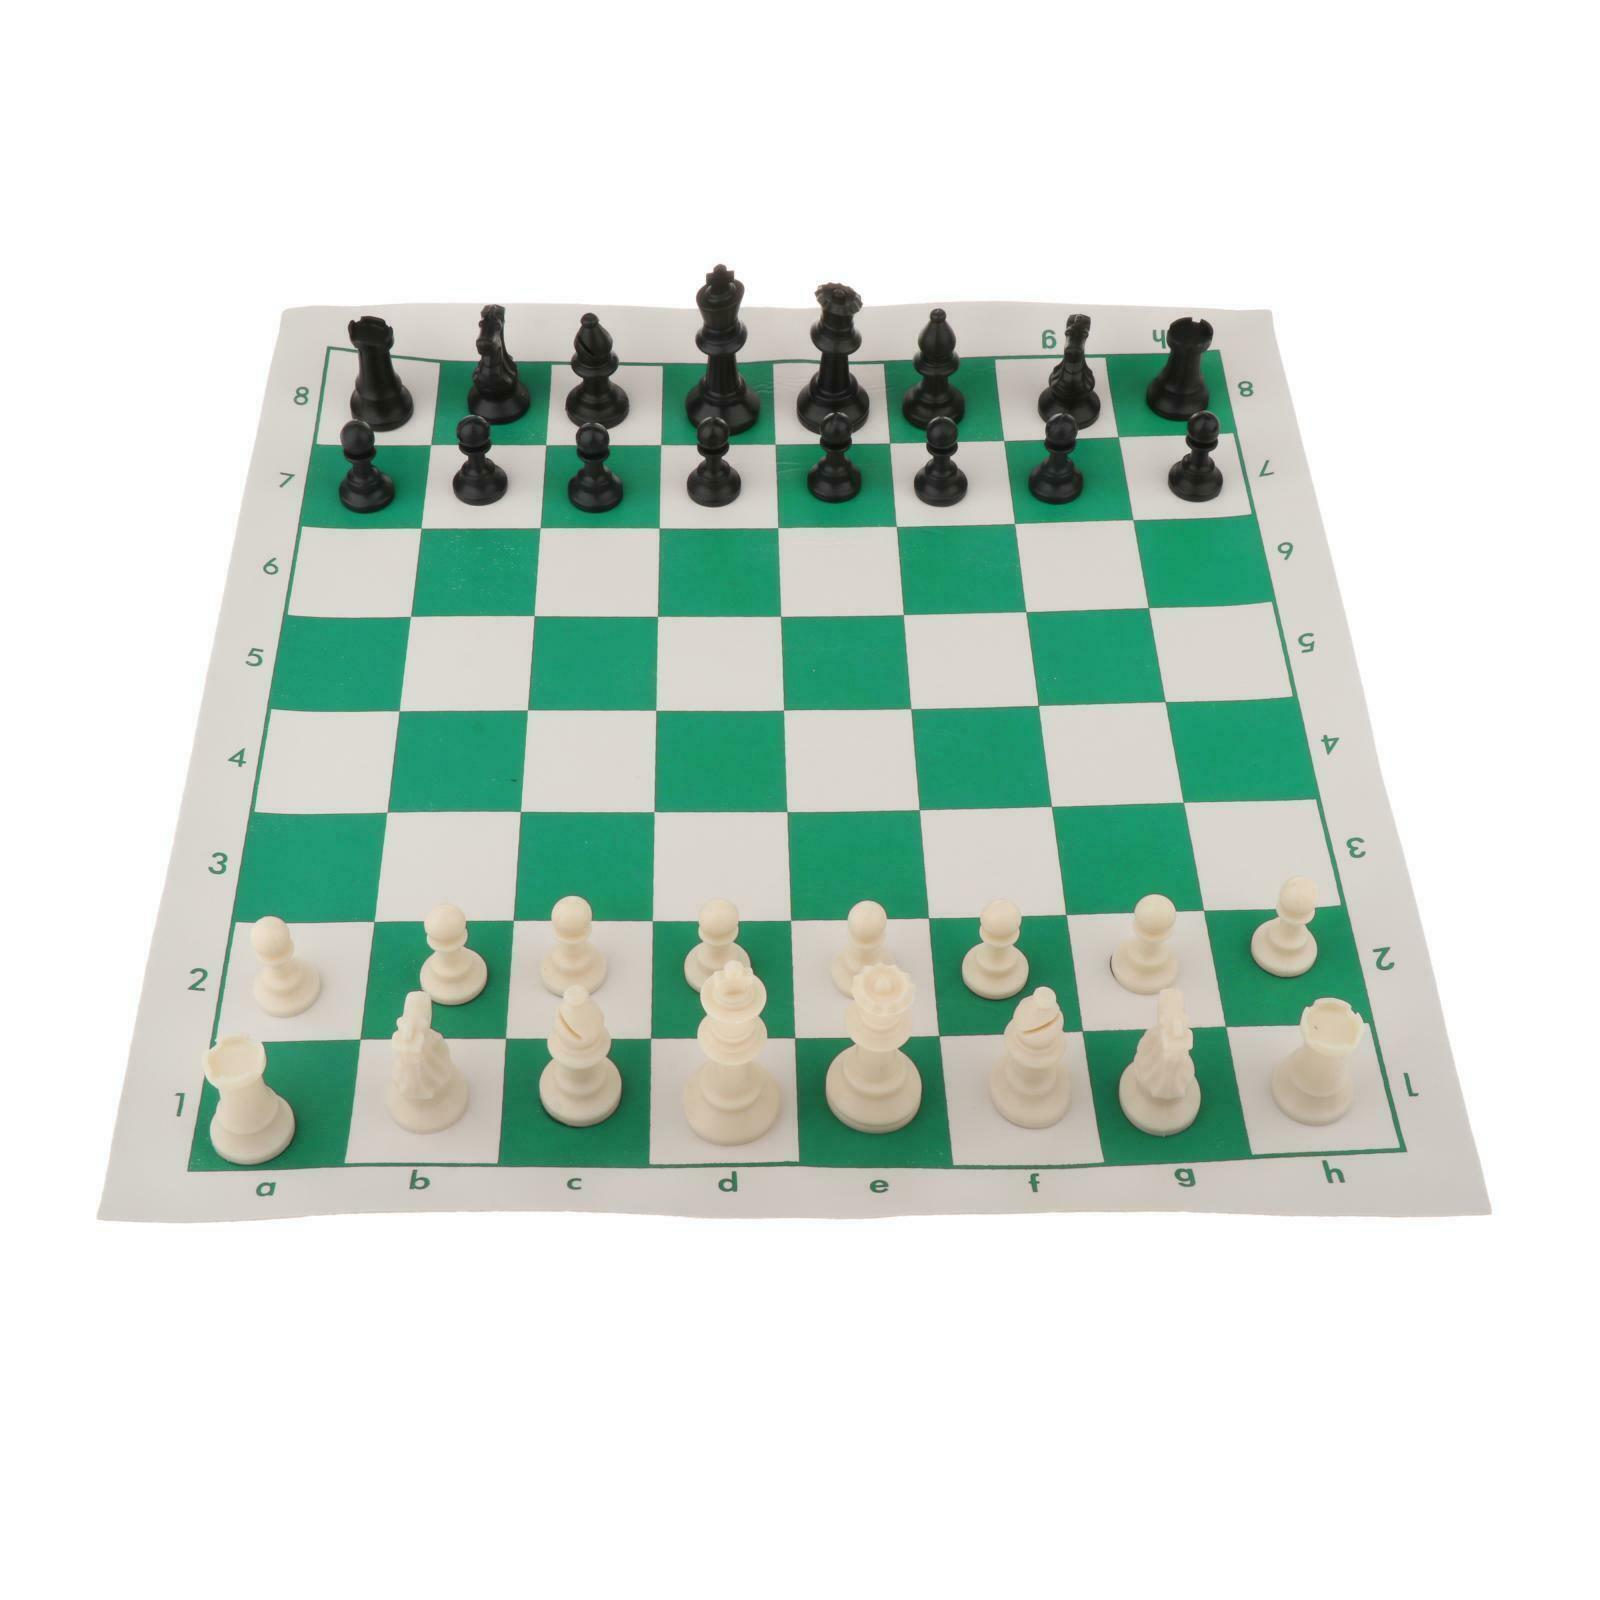 Travel Portable Chess Set Board Games 15"x3" Plastic for Kids Home Camping